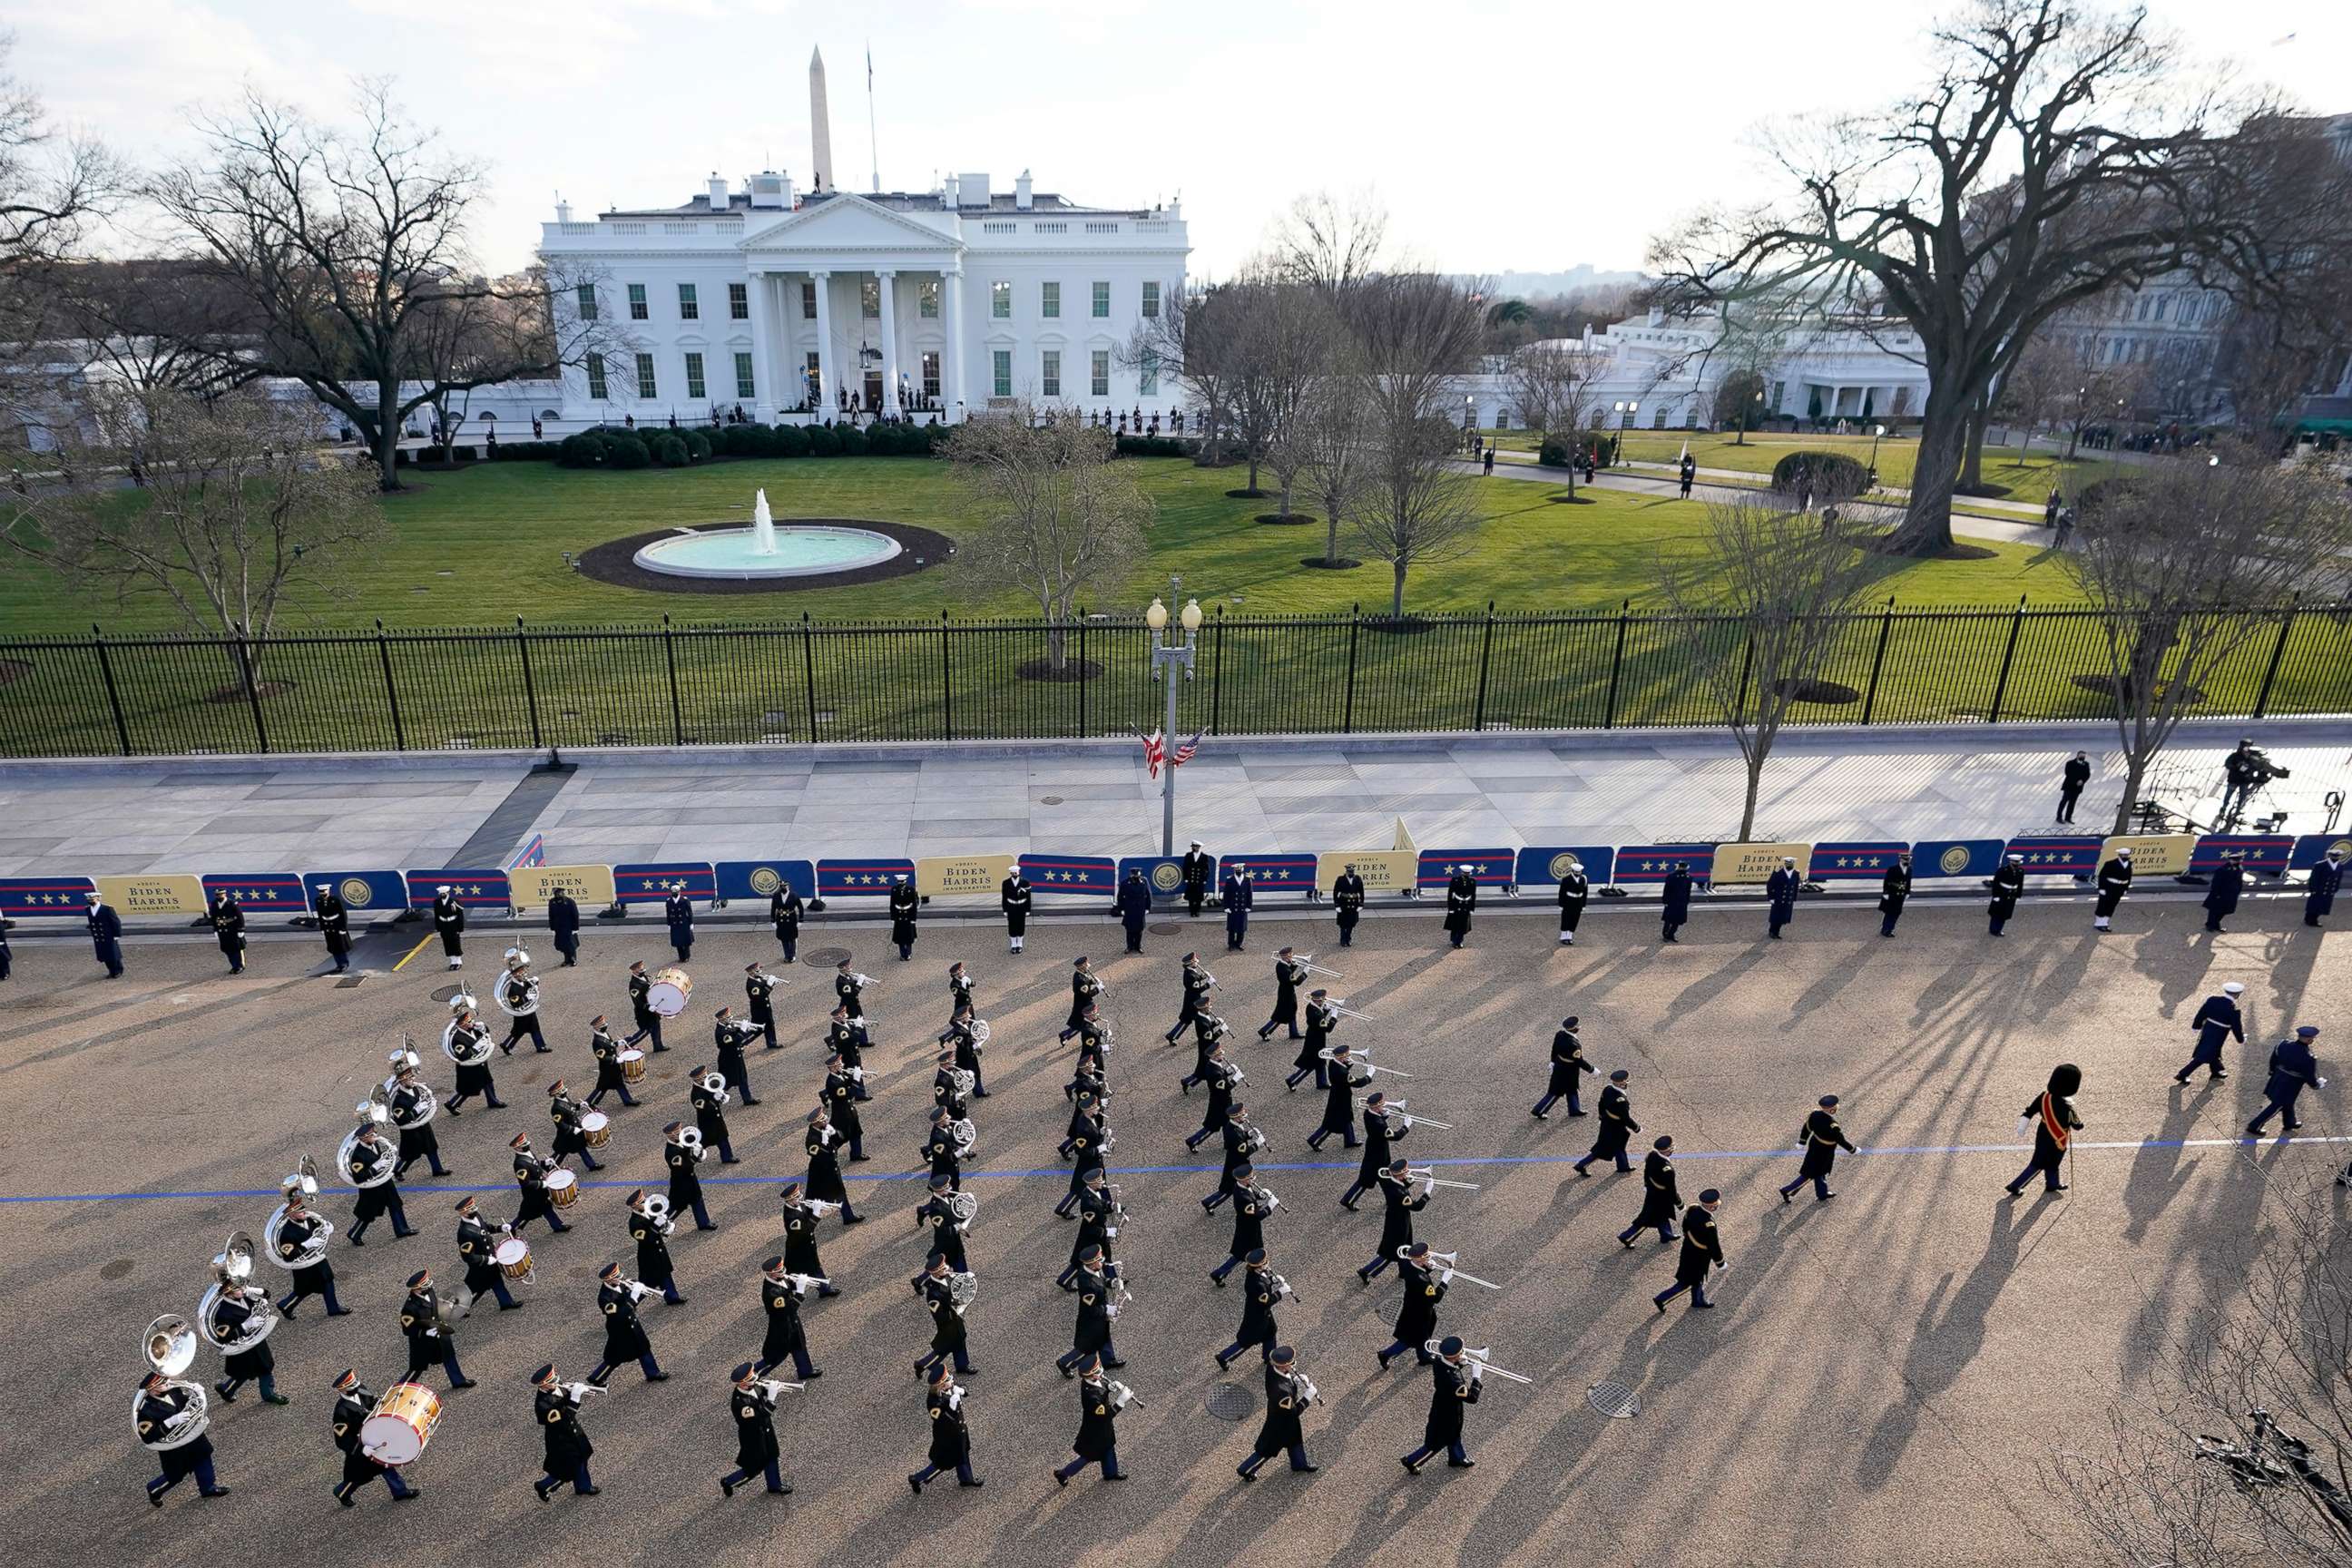 PHOTO: A U.S. Army band marches near the White House during the Presidential Escort, part of Inauguration Day ceremonies for President Joe Biden, Jan. 20, 2021.